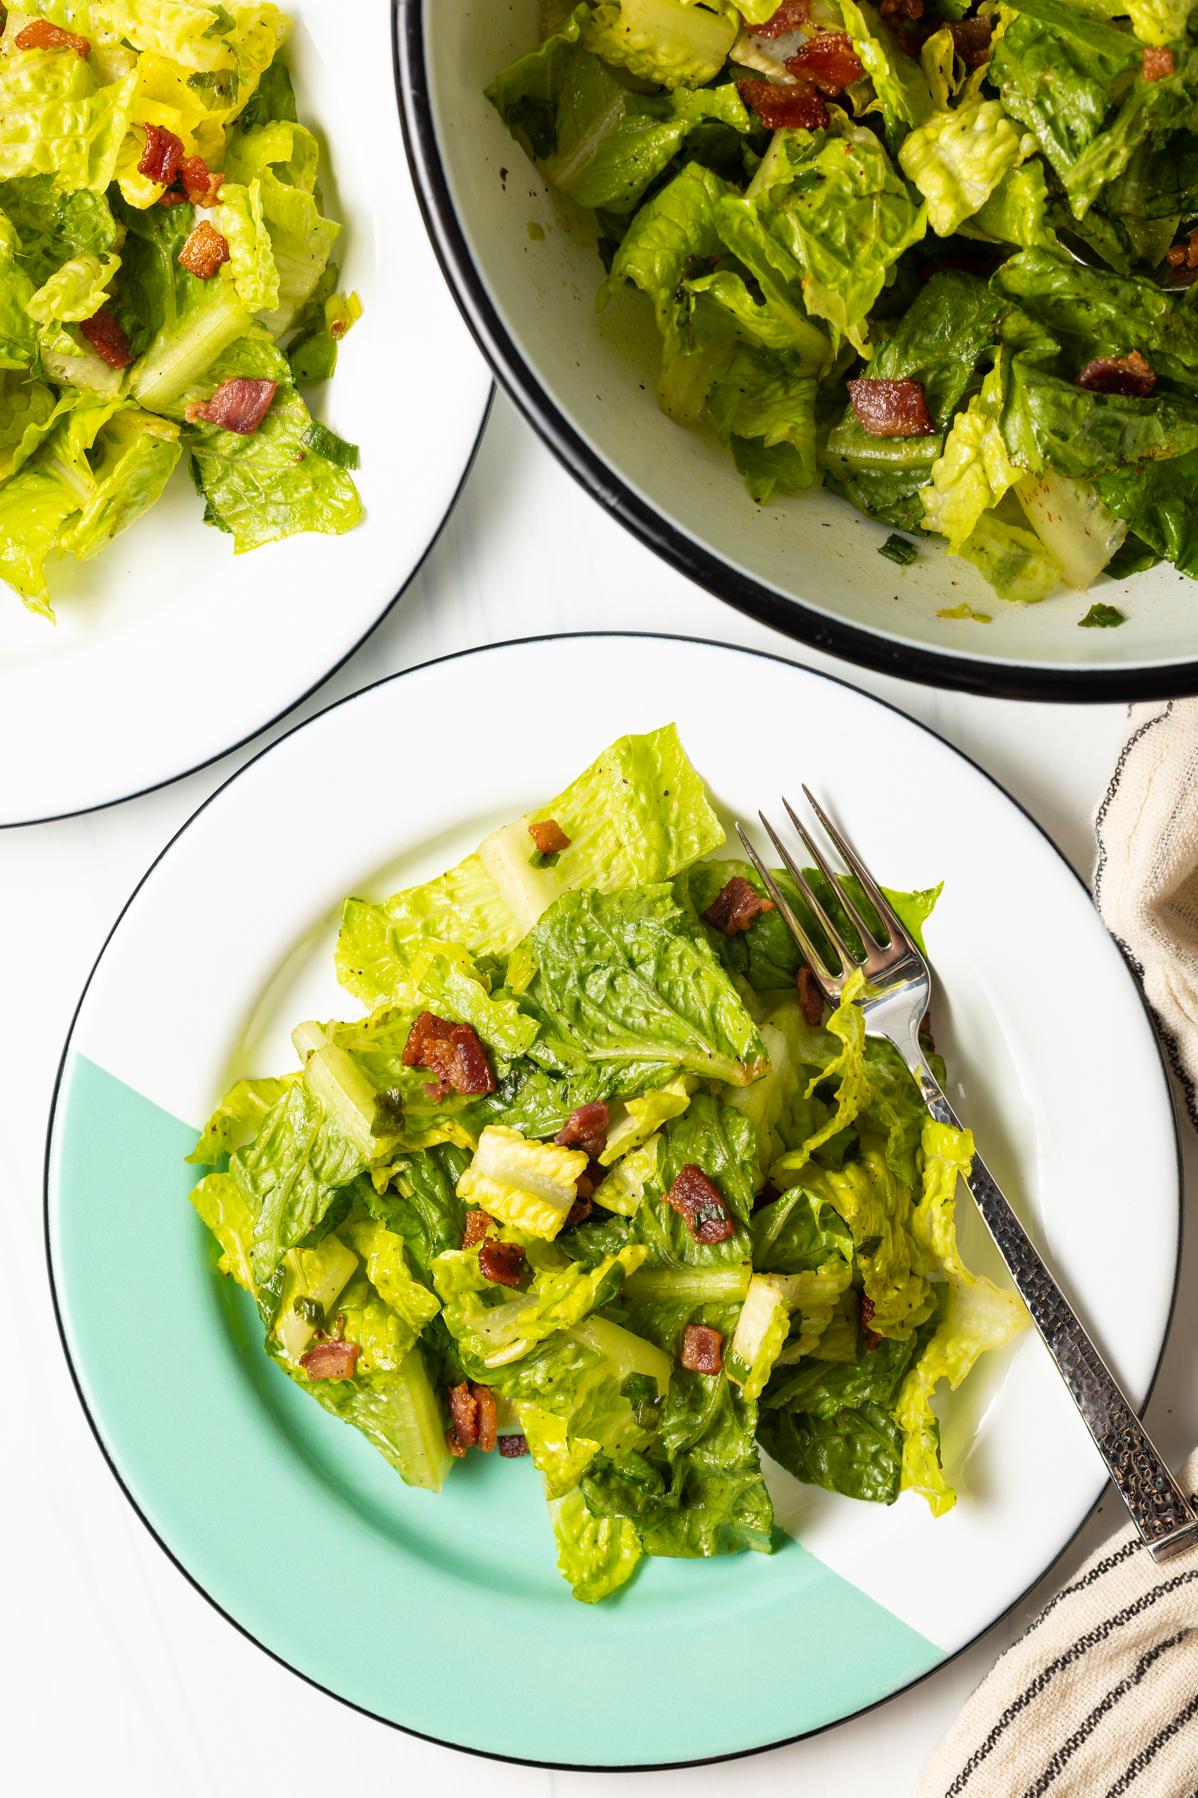  Fresh, crisp lettuce and bacon bits combined for a tantalizing, light summer meal.